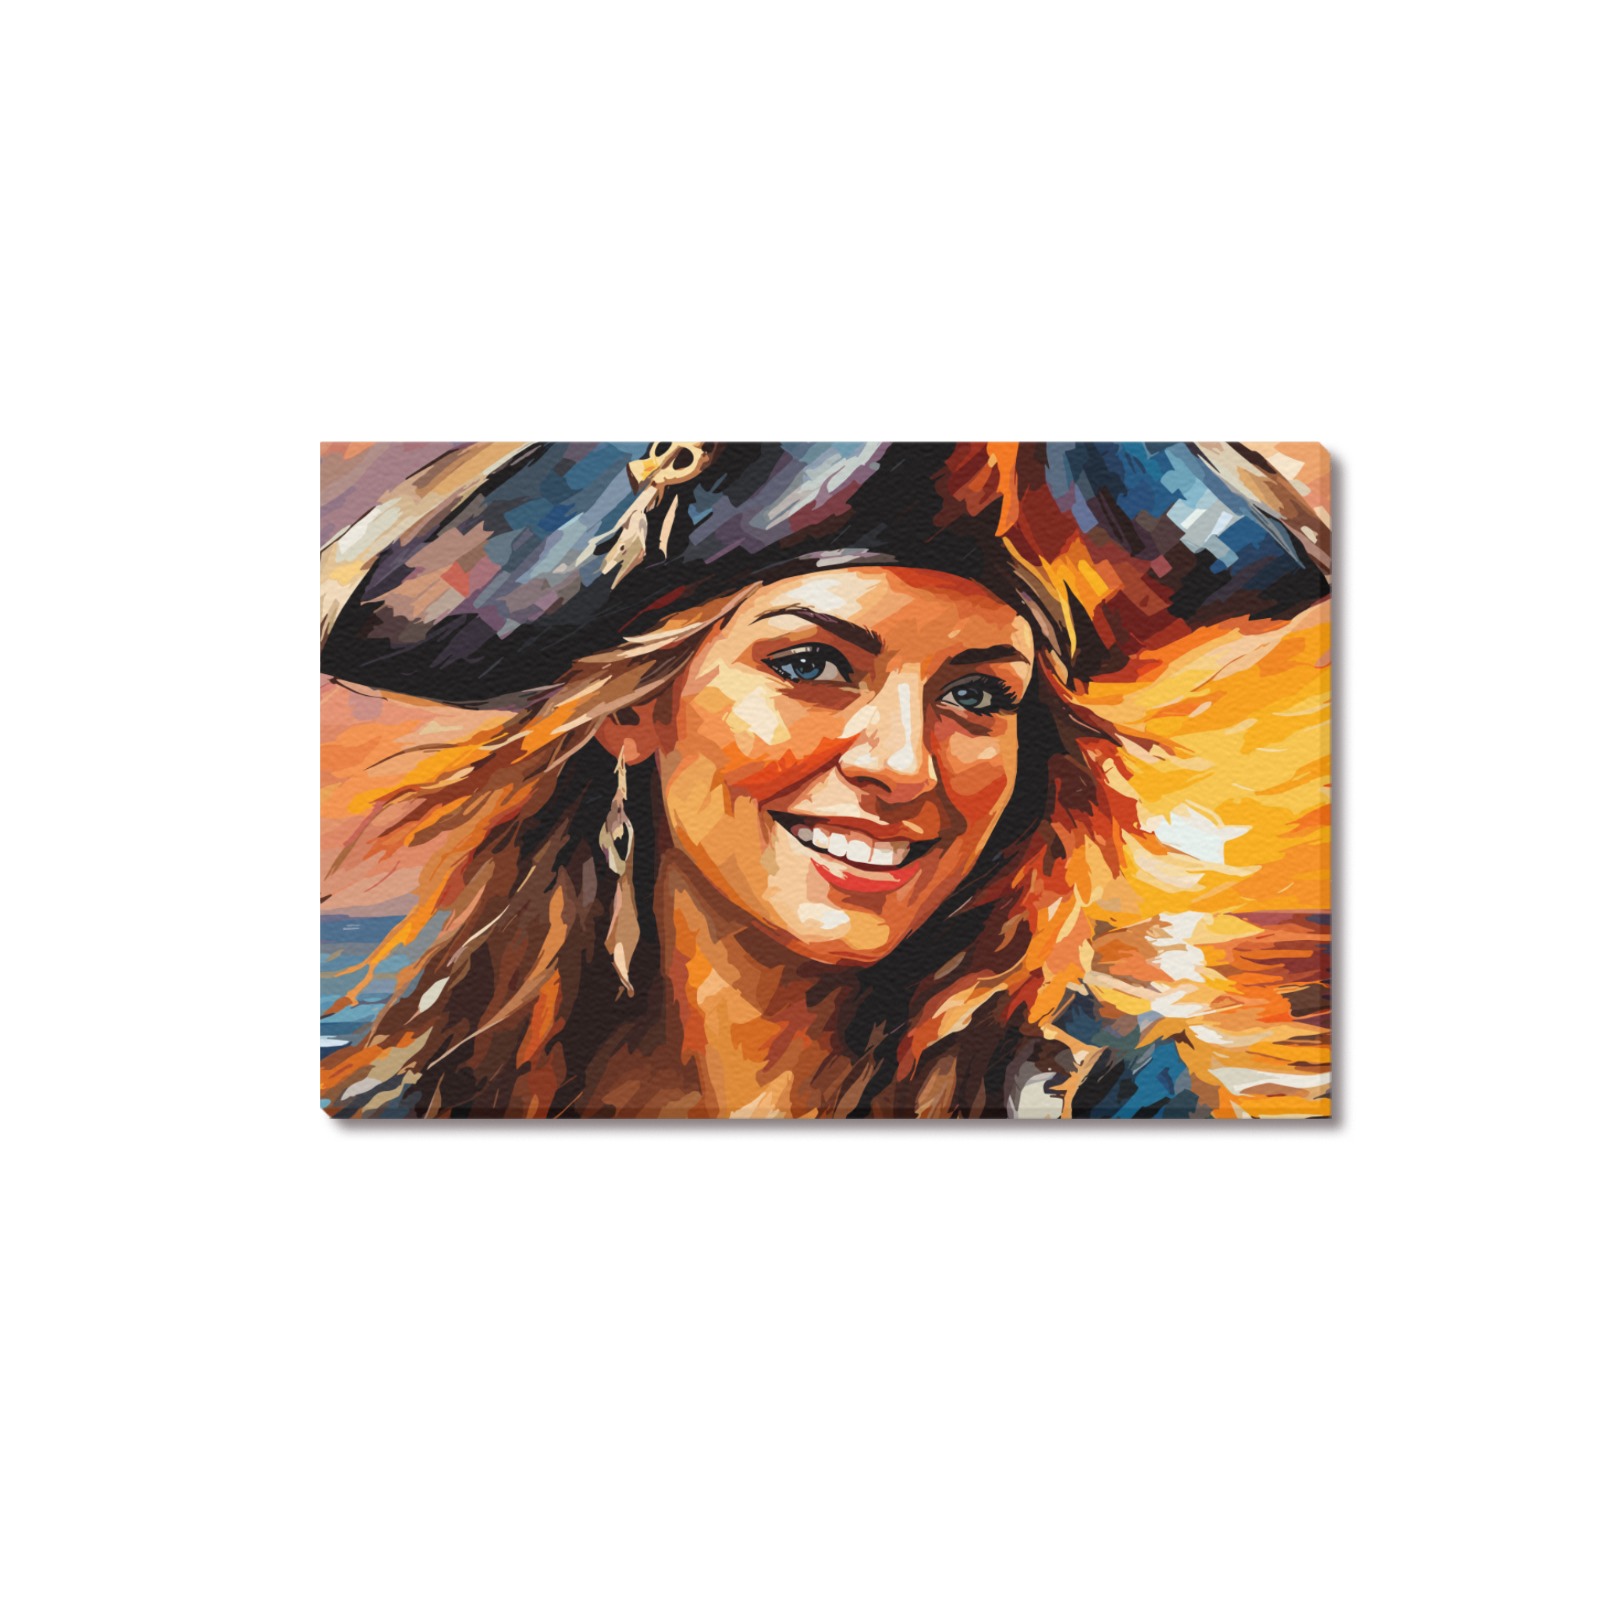 Striking smiling pirate lady at colorful sunset. Upgraded Canvas Print 18"x12"